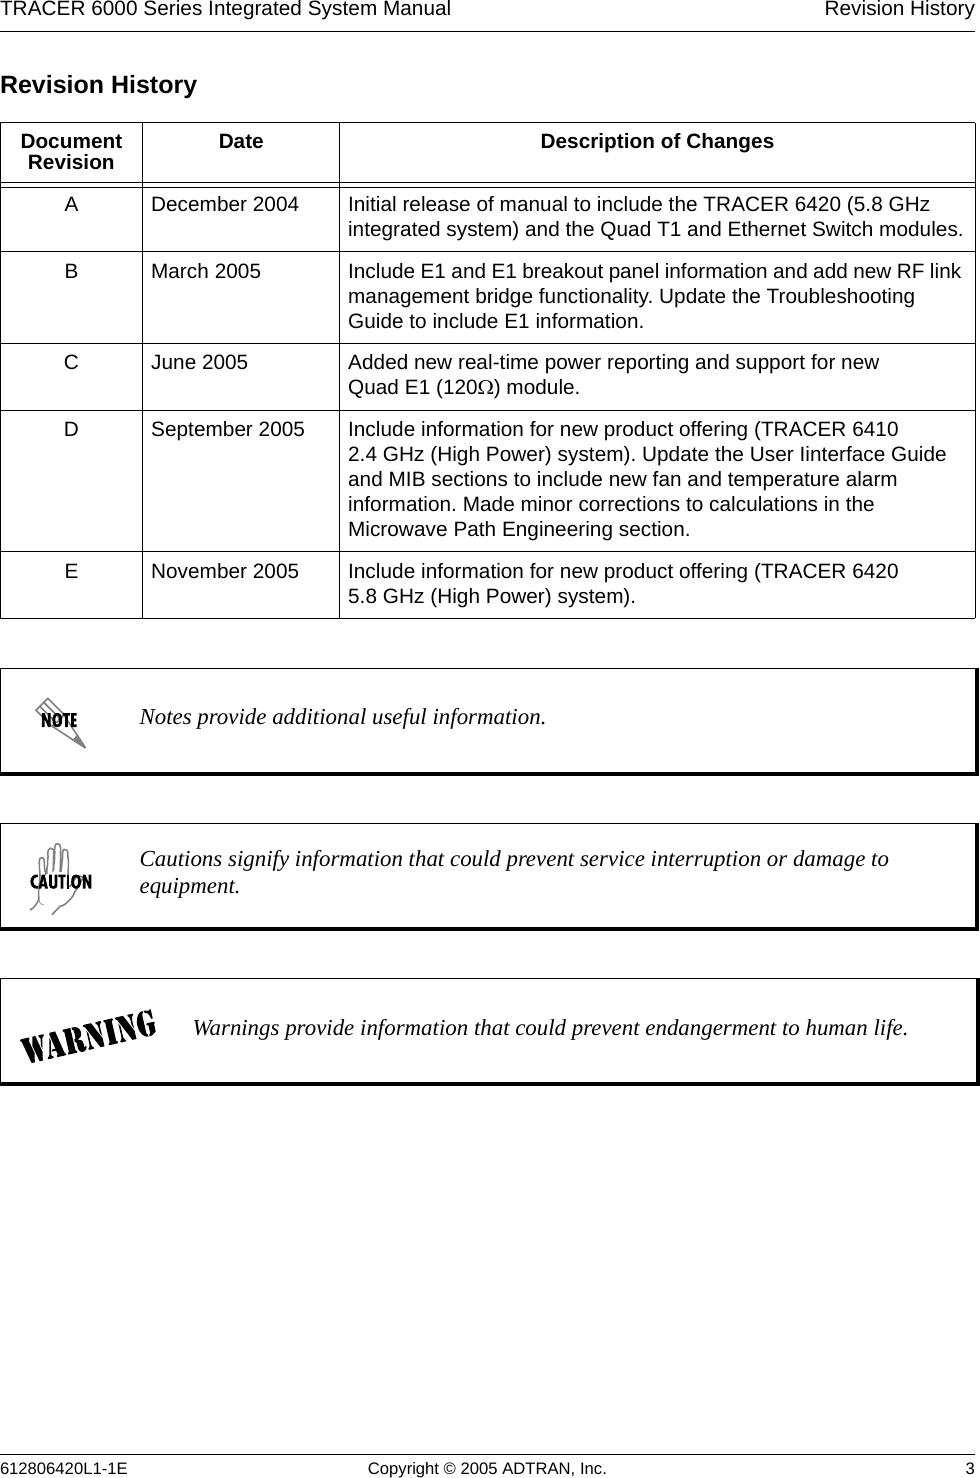 TRACER 6000 Series Integrated System Manual  Revision History612806420L1-1E Copyright © 2005 ADTRAN, Inc. 3Revision HistoryDocument Revision Date Description of ChangesADecember 2004 Initial release of manual to include the TRACER 6420 (5.8 GHz integrated system) and the Quad T1 and Ethernet Switch modules.BMarch 2005 Include E1 and E1 breakout panel information and add new RF link management bridge functionality. Update the Troubleshooting Guide to include E1 information.CJune 2005 Added new real-time power reporting and support for new Quad E1 (120Ω) module.DSeptember 2005 Include information for new product offering (TRACER 6410 2.4 GHz (High Power) system). Update the User Iinterface Guide and MIB sections to include new fan and temperature alarm information. Made minor corrections to calculations in the Microwave Path Engineering section.ENovember 2005 Include information for new product offering (TRACER 6420 5.8 GHz (High Power) system).Notes provide additional useful information.Cautions signify information that could prevent service interruption or damage to equipment.Warnings provide information that could prevent endangerment to human life.